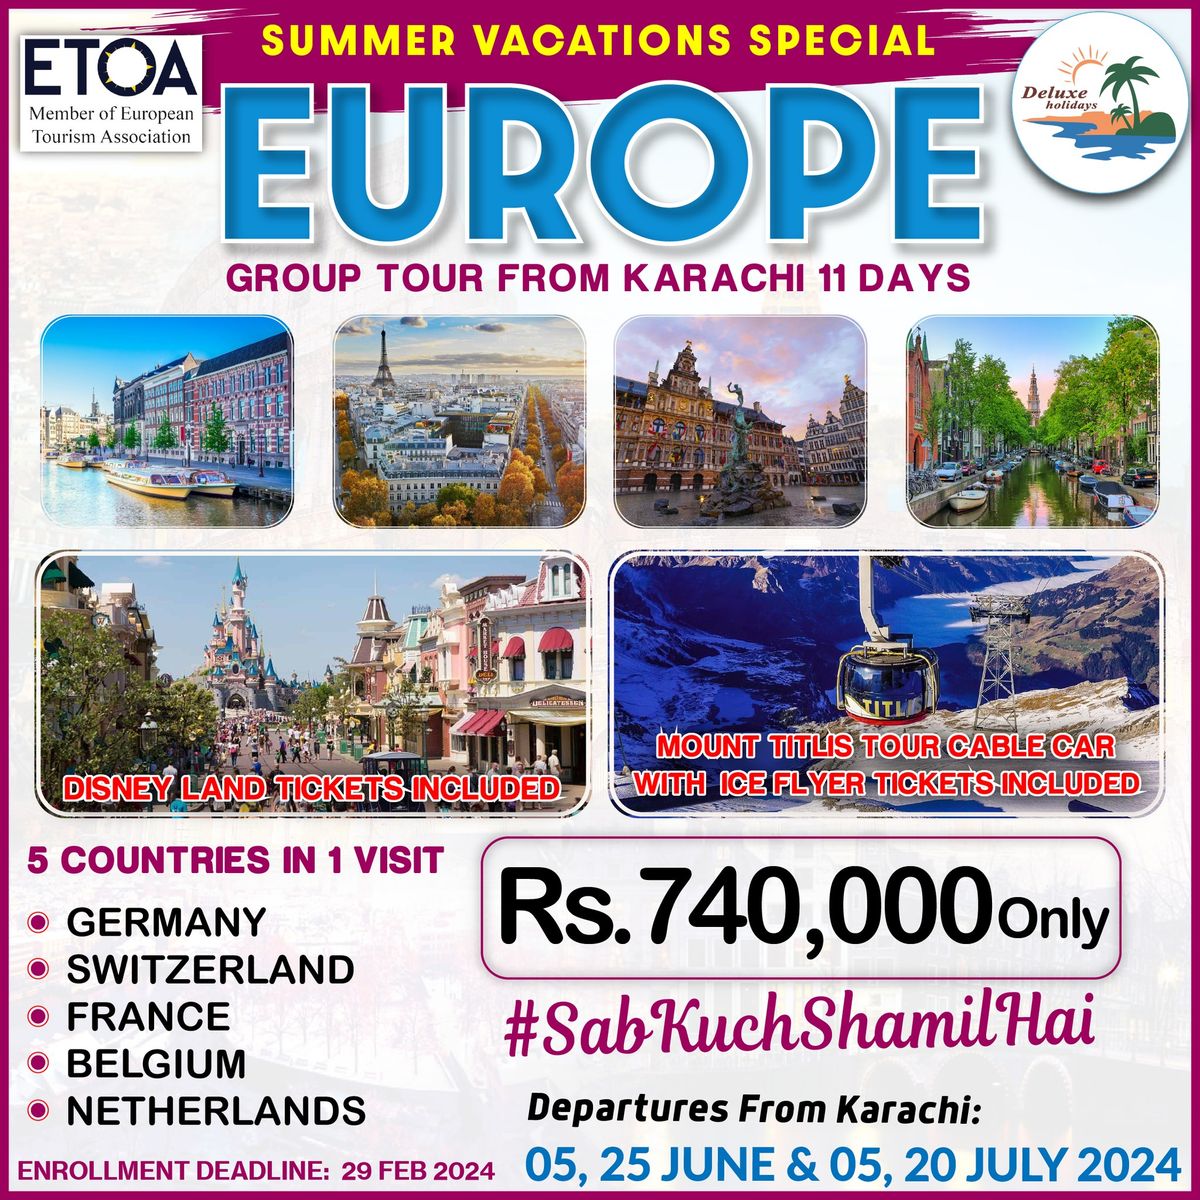 SUMMER VACATIONS EUROPE SPECIAL GROUP TOUR FROM KARACHI \ud83c\udf89\ud83e\udd29 EUROPE 11- DAYS GROUP TOUR  